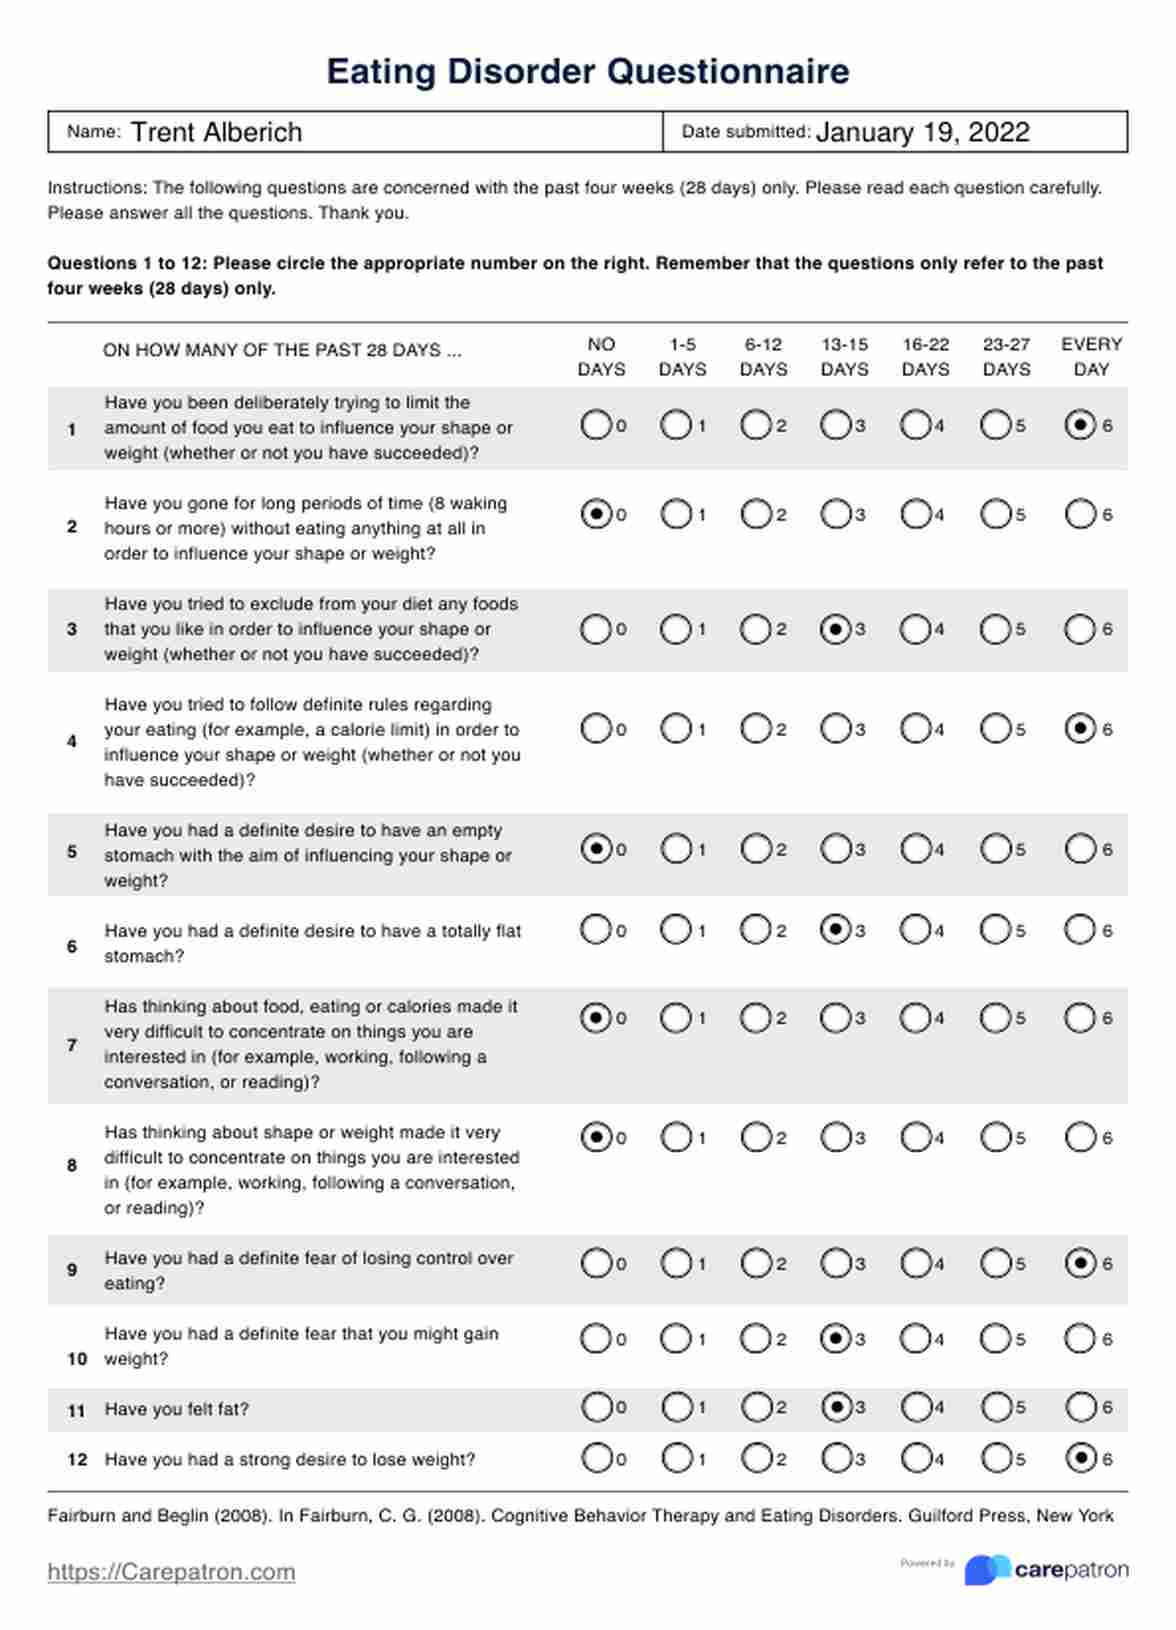 Eating Disorder Questionnaire PDF Example